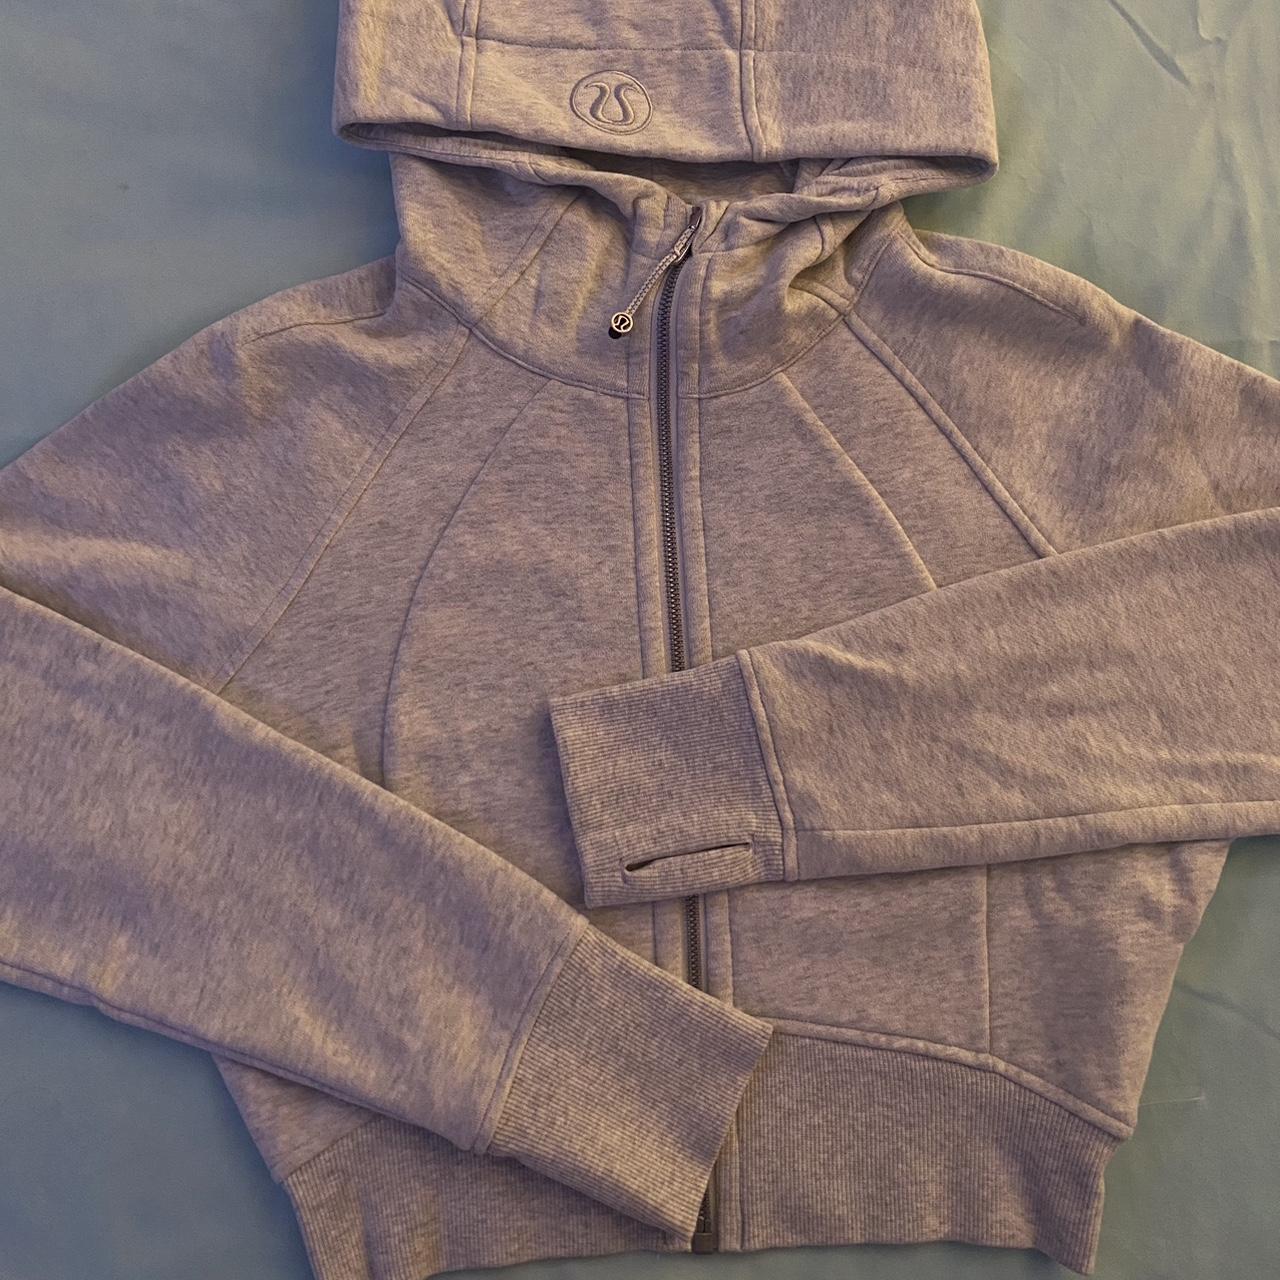 If you love the look of the lululemon Scuba Hoodie, but the $118